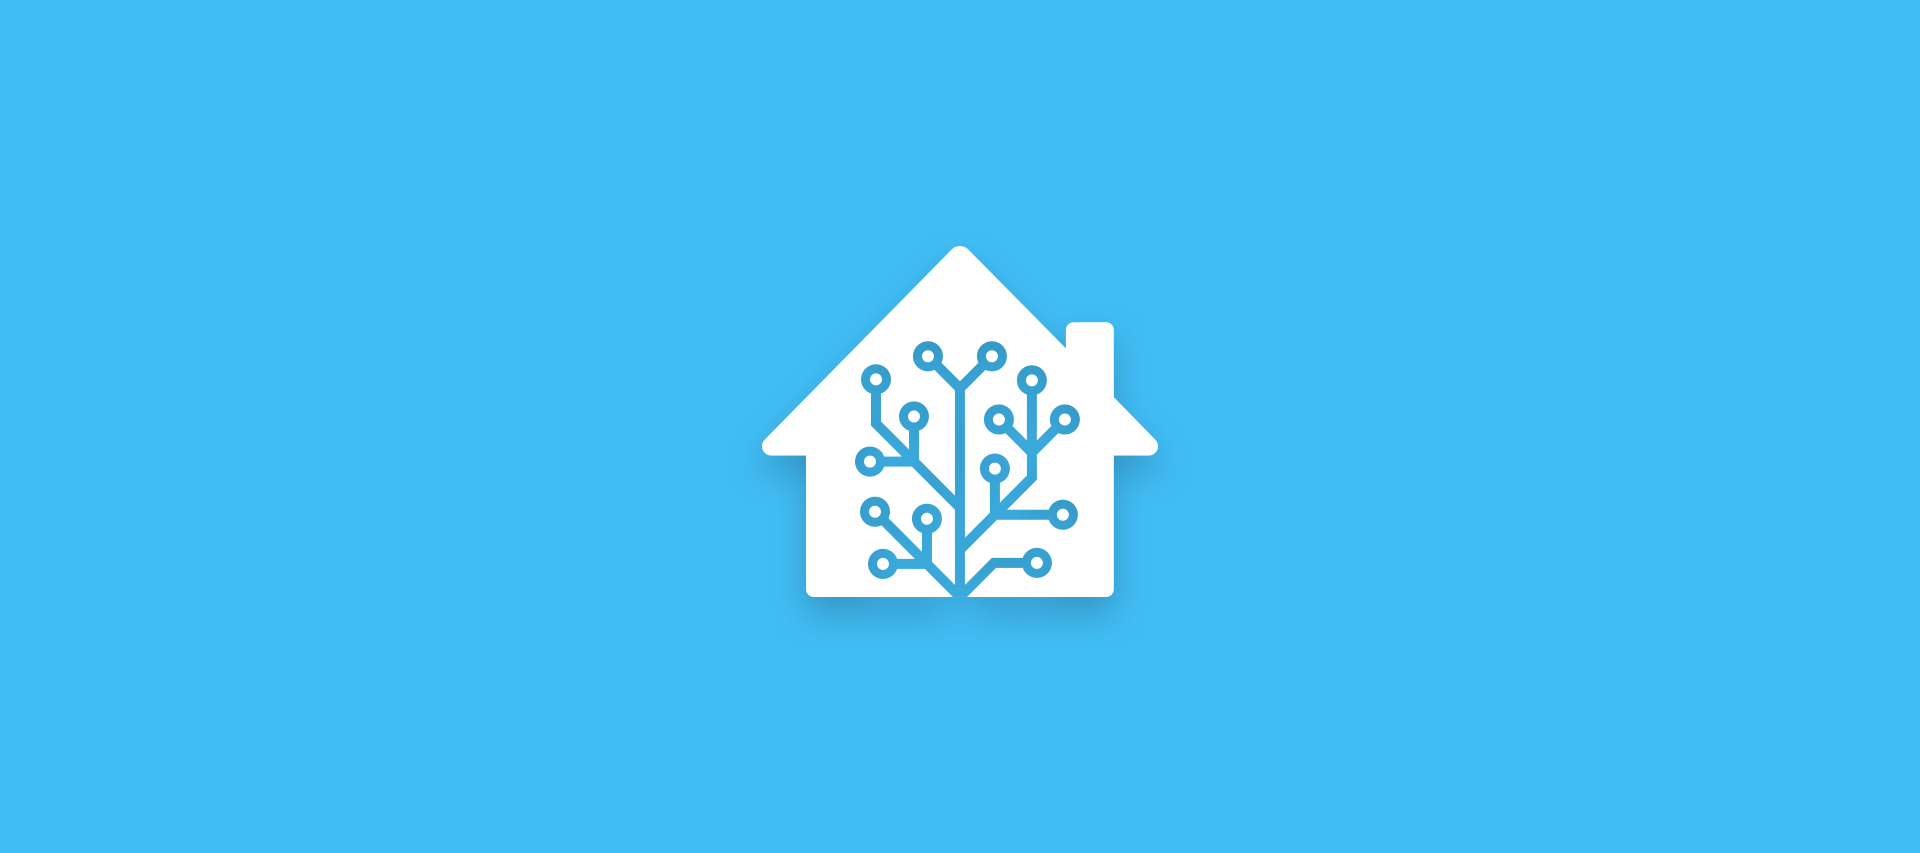 Overriding Home Assistant components